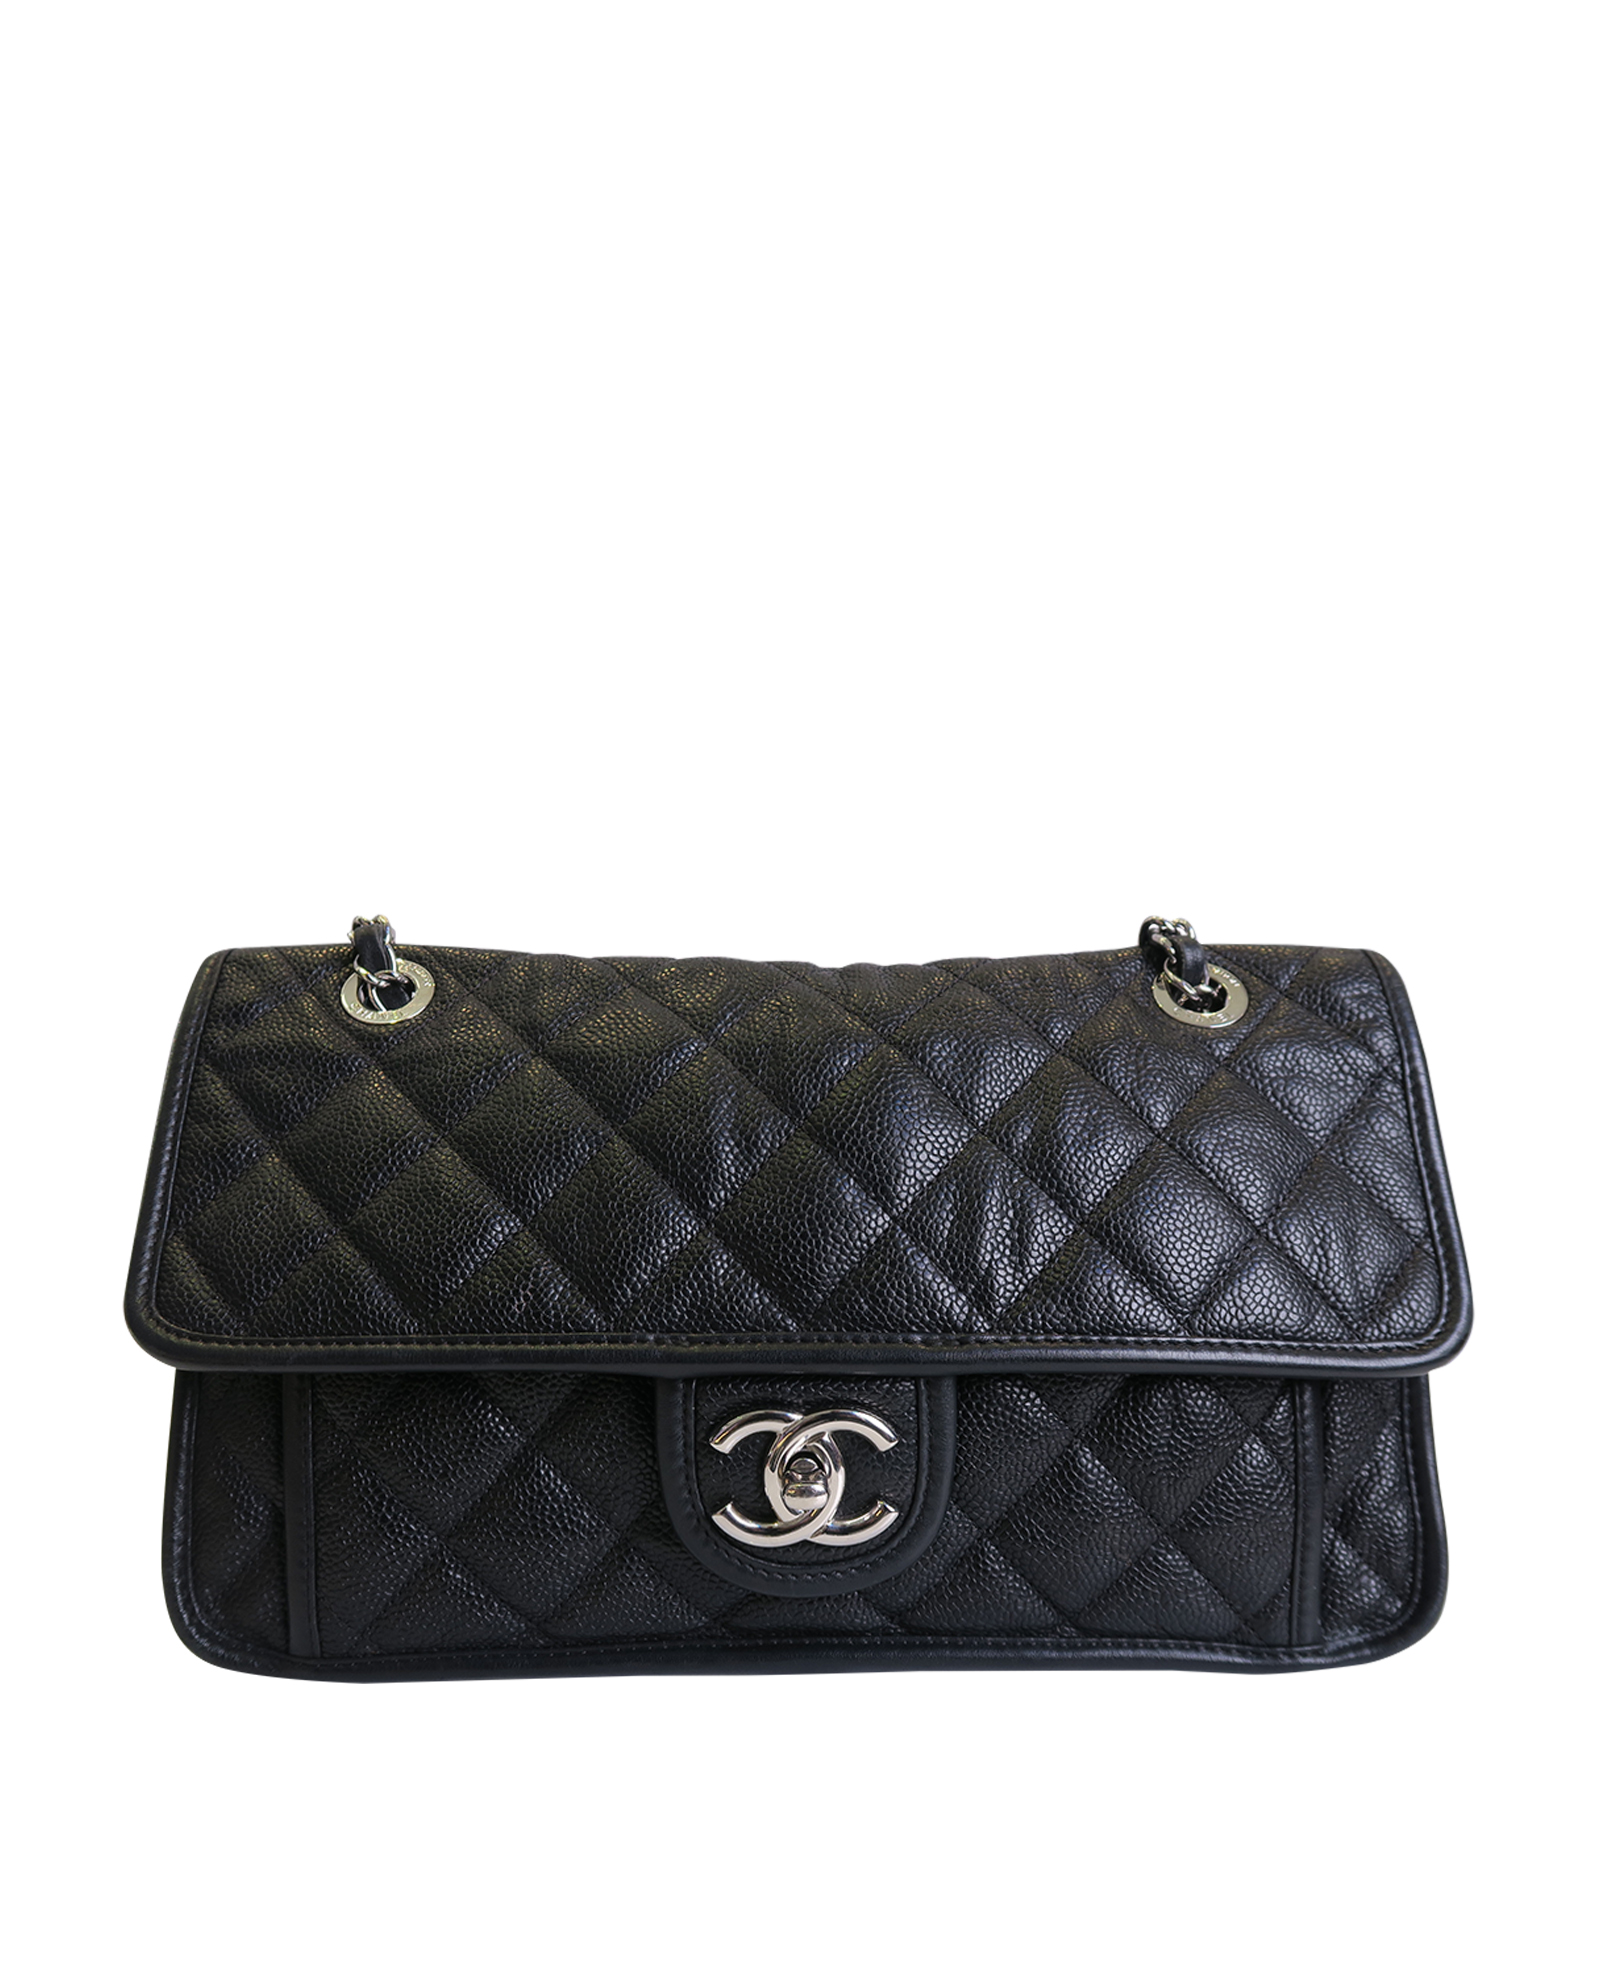 French Riviera Flap Bag, Chanel - Designer Exchange | Buy Sell Exchange